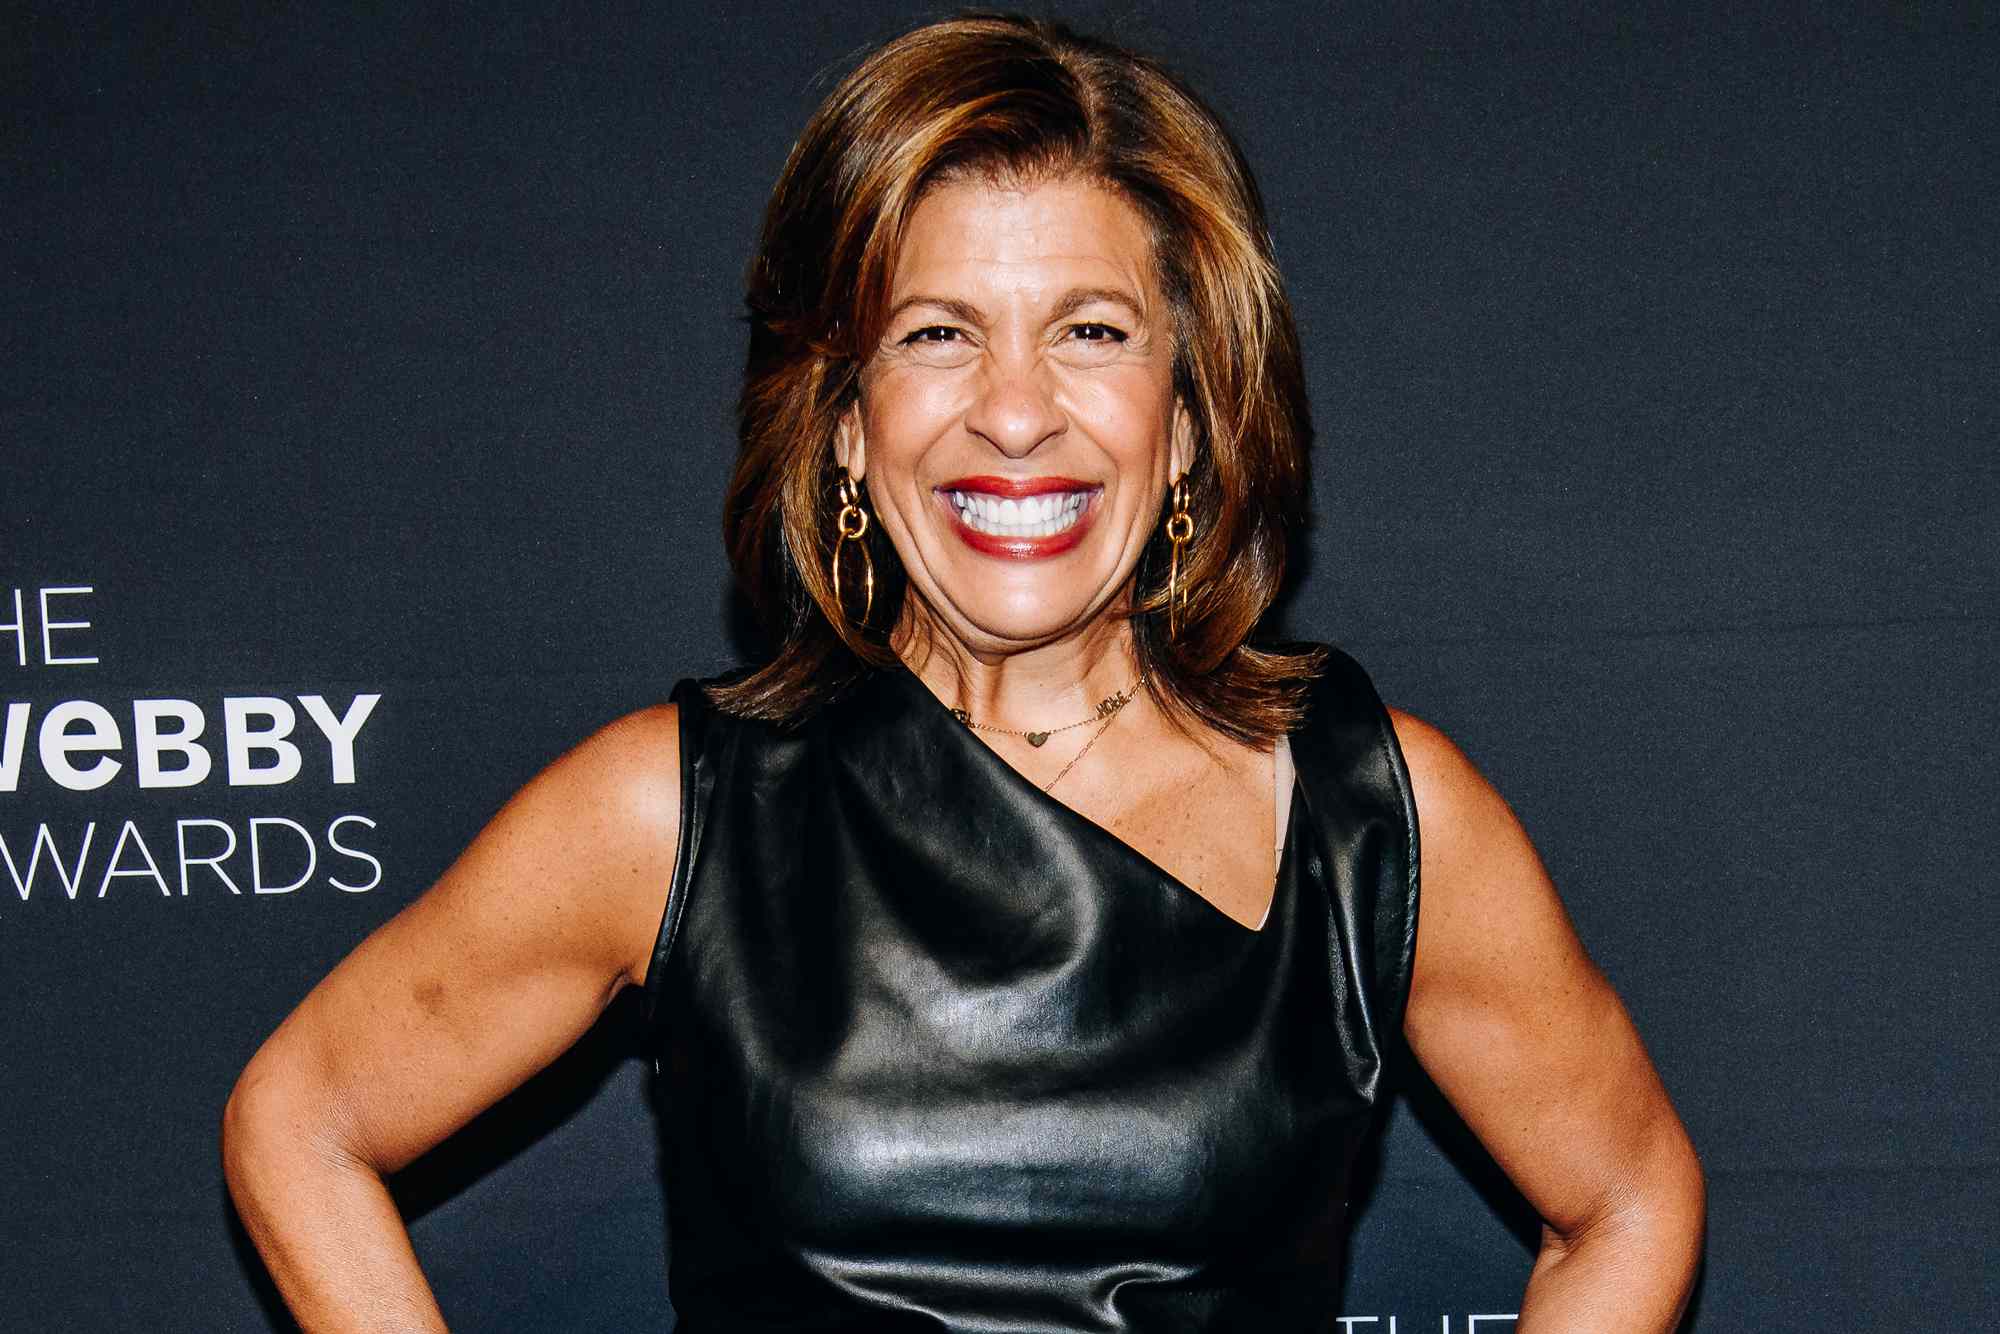 Hoda Kotb Explains Why She Doesn’t Talk About Dieting With Her Daughters: ‘We’ve Never Said It’